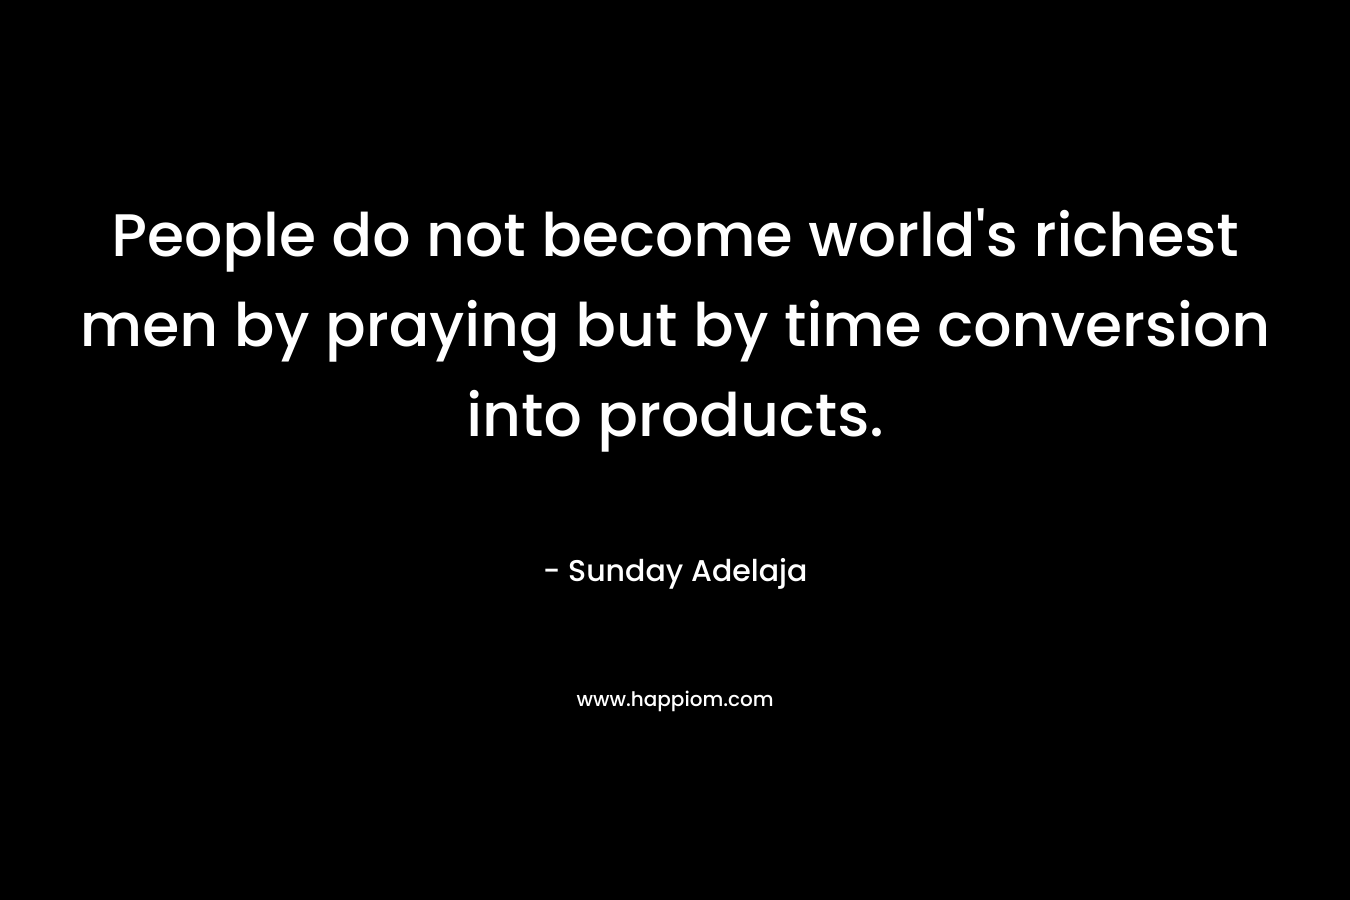 People do not become world's richest men by praying but by time conversion into products.